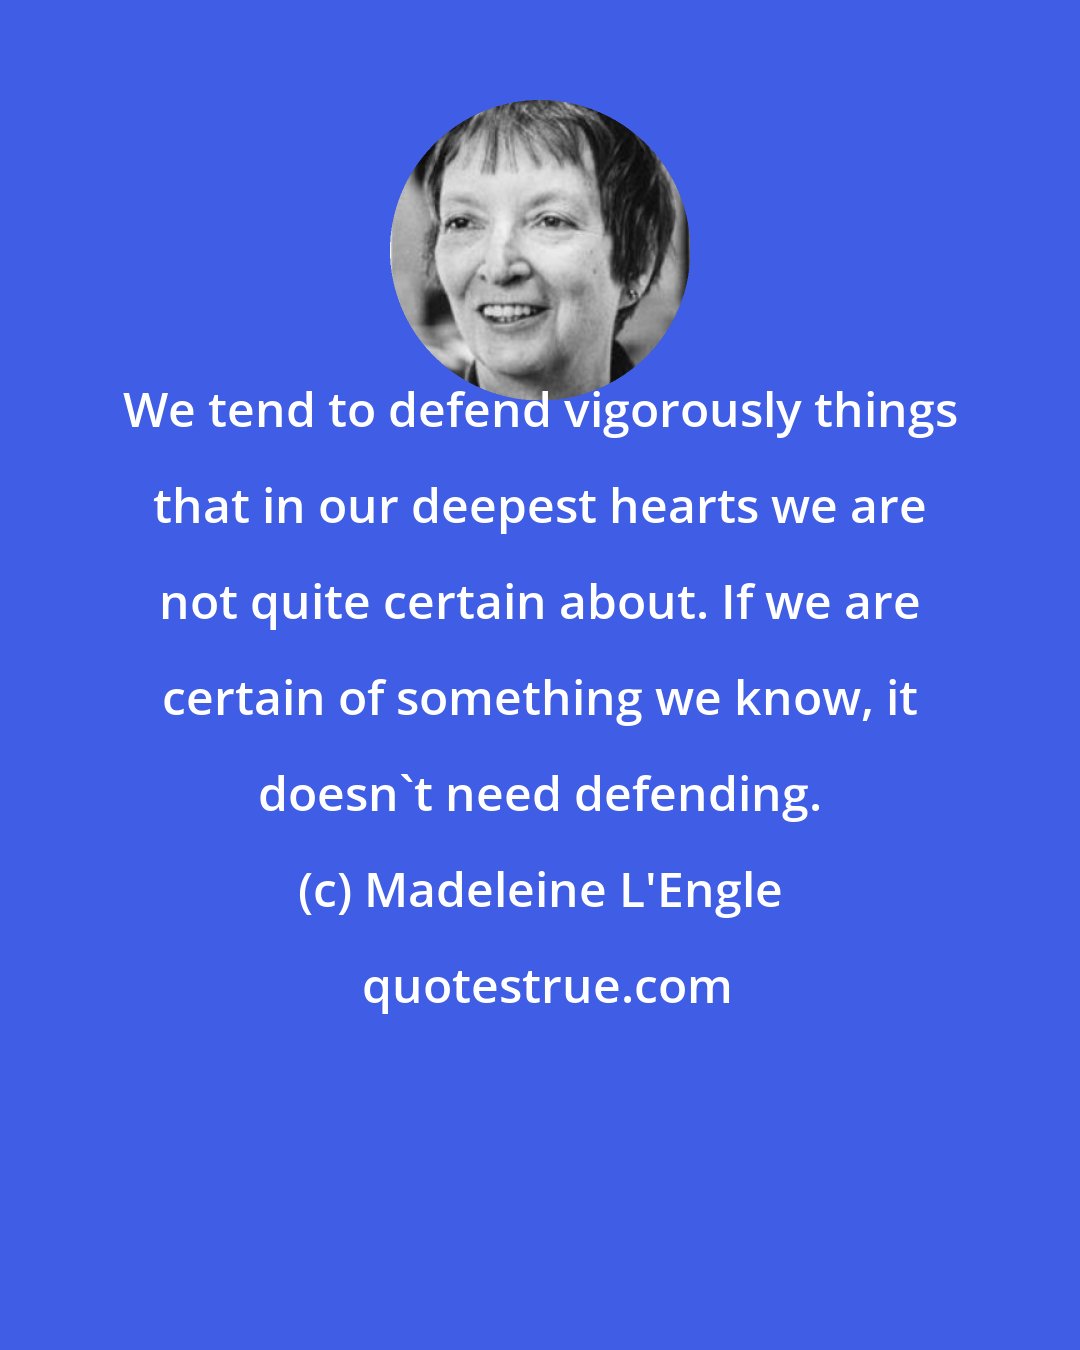 Madeleine L'Engle: We tend to defend vigorously things that in our deepest hearts we are not quite certain about. If we are certain of something we know, it doesn't need defending.